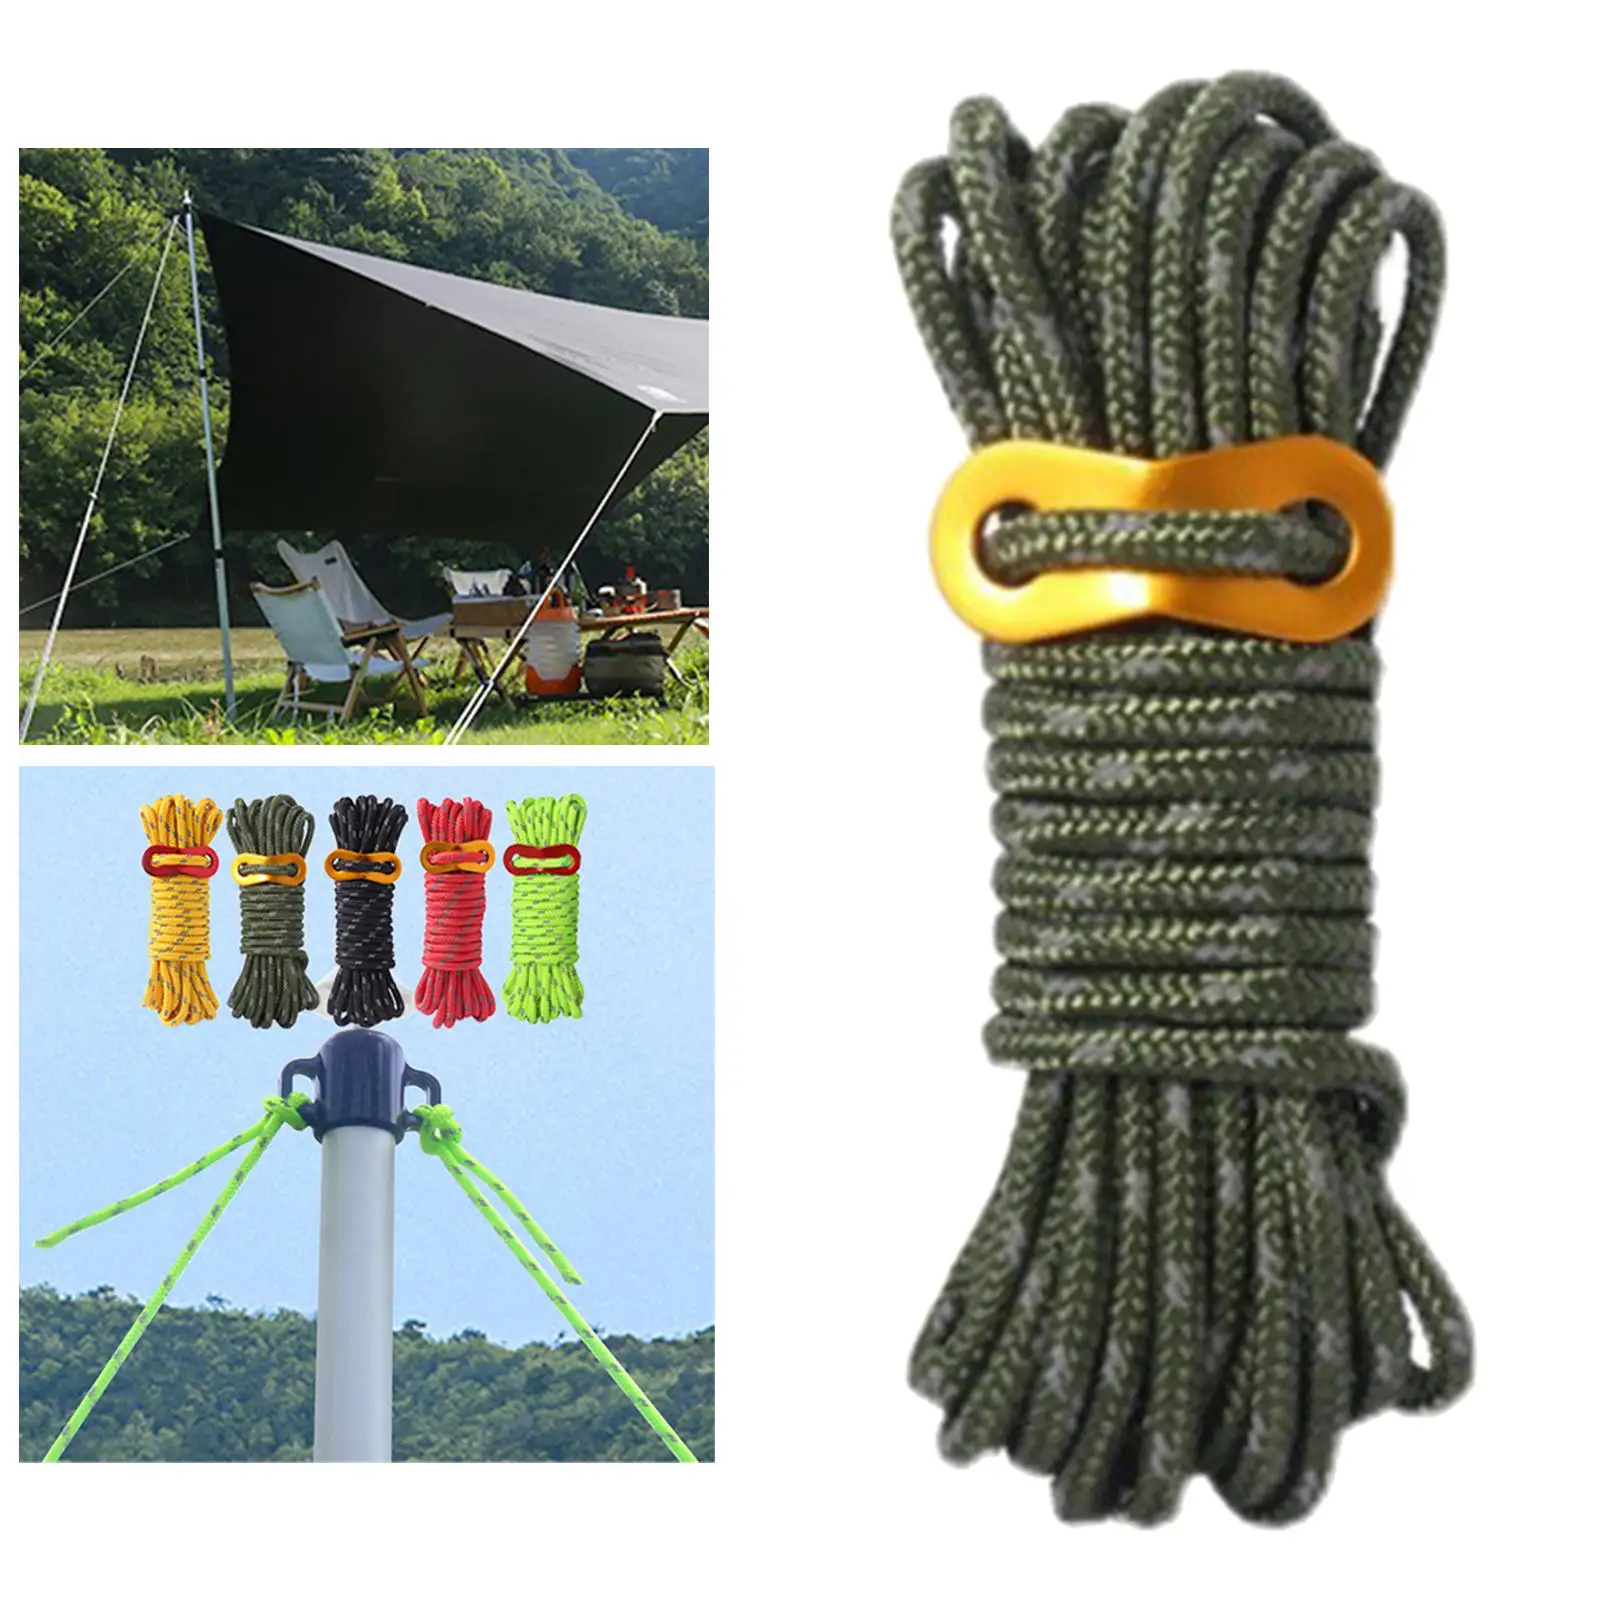 5mm Outdoor Guy Lines Tent Cords Camping Rope with Aluminum Guylines Adjuster Tensioner for Camping, Hiking, Backpacking